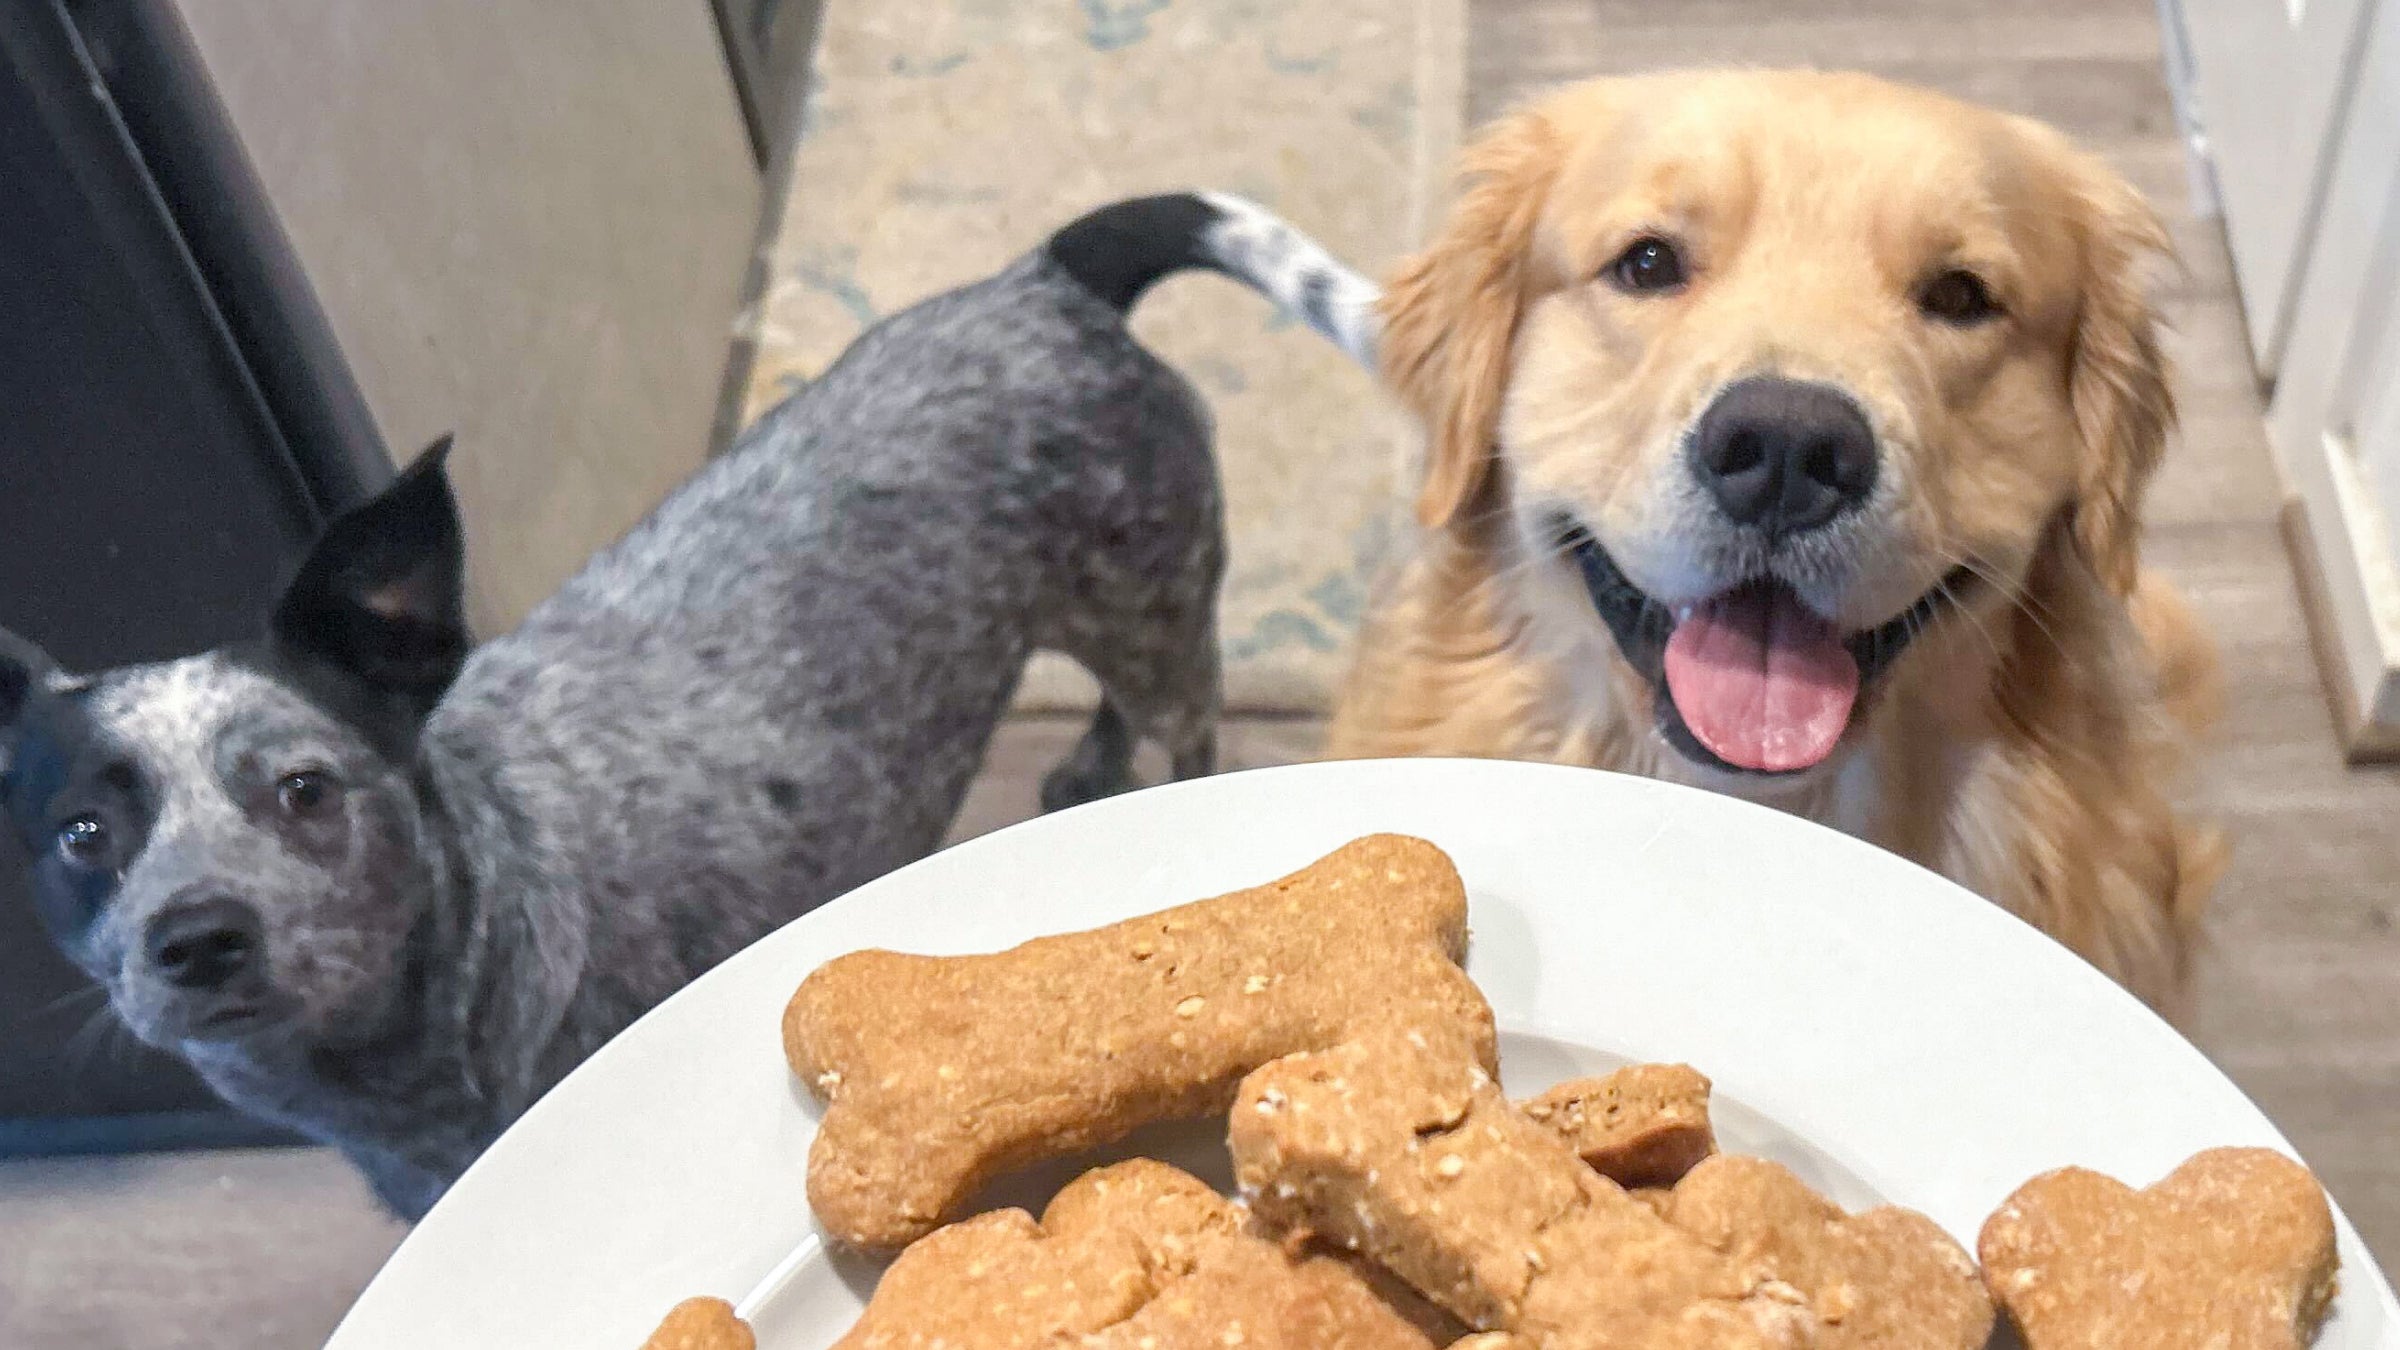 Two dogs look at a plate of dog boned shaped treats on a white plate